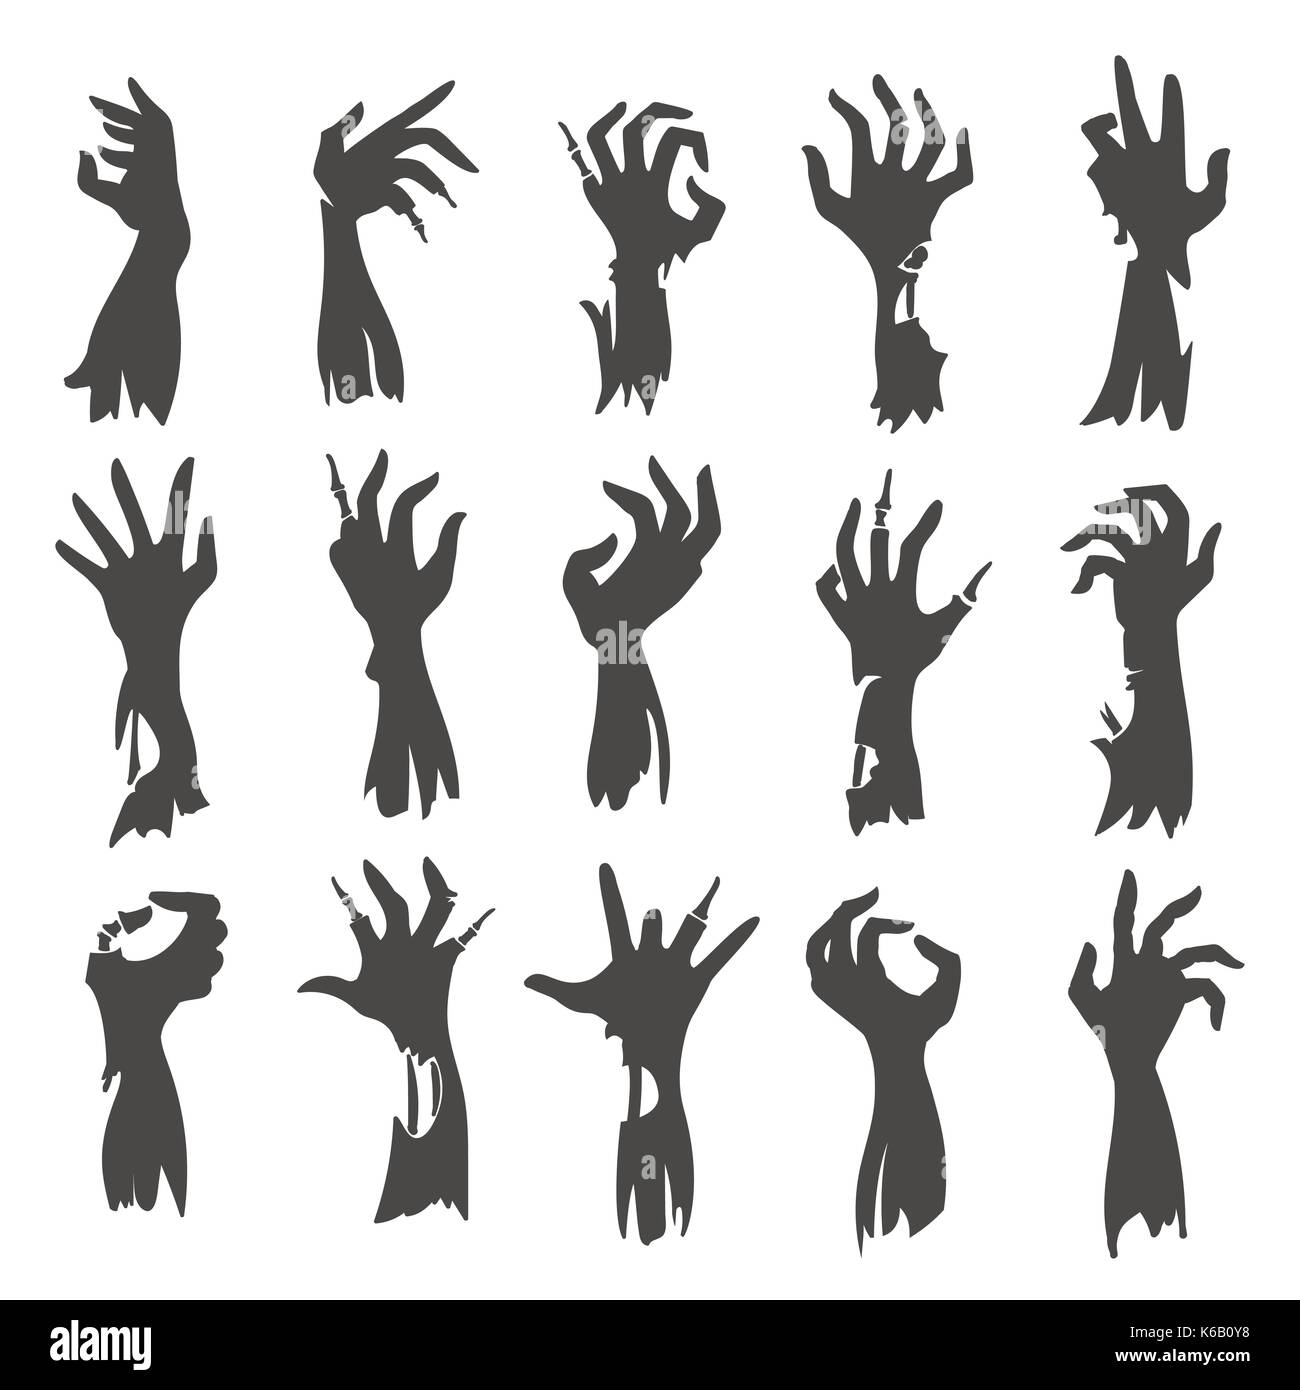 Undead zombie hand silhouettes isolated on white background. Dead hands fear scary halloween black creepy vector silhouette set Stock Vector